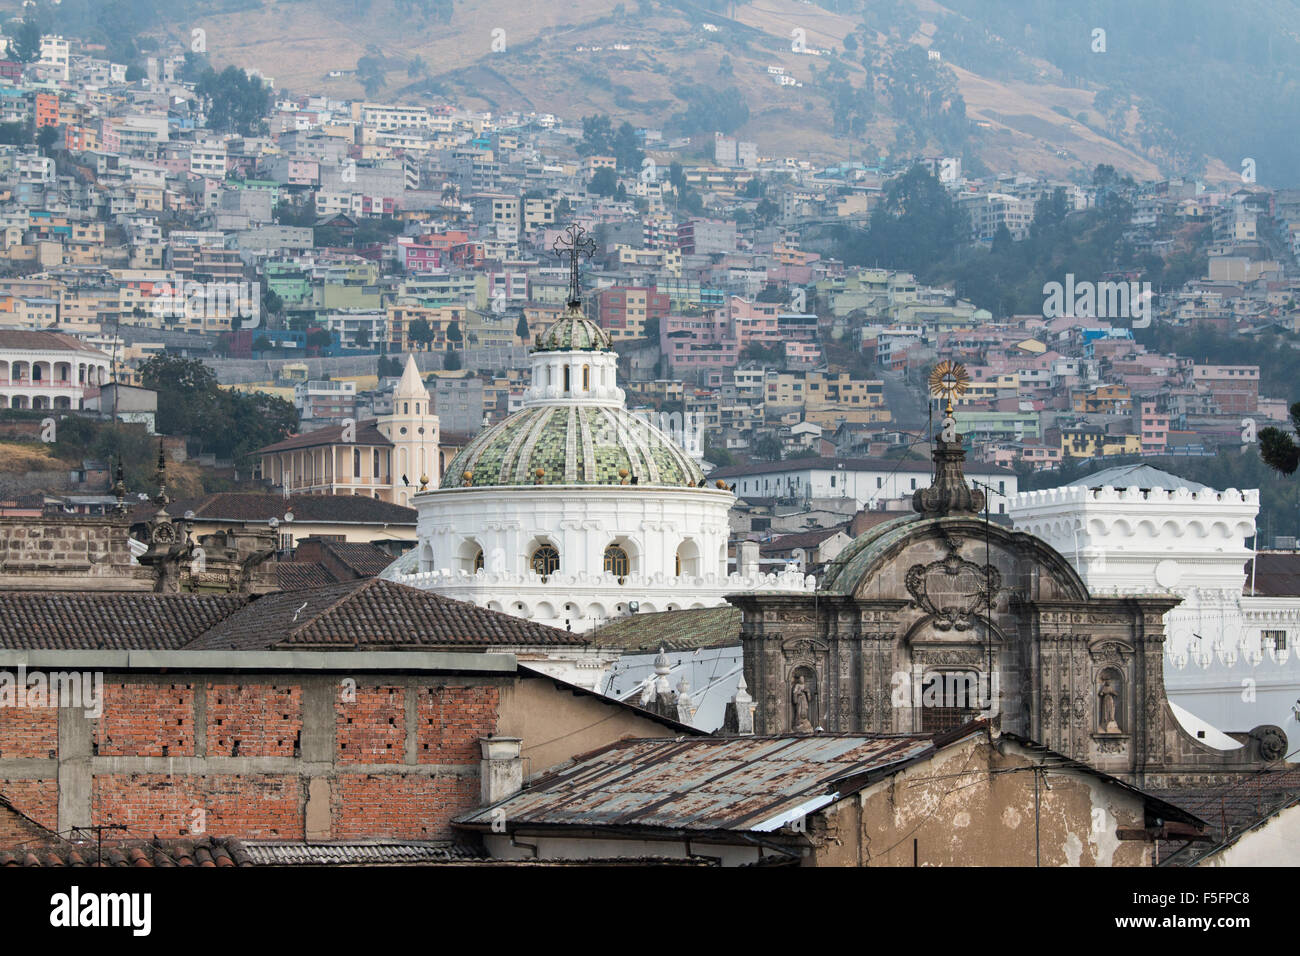 At an elevation of 2,850 metres (9,350 ft) above sea level, Quito is the highest official capital city in the world. Stock Photo